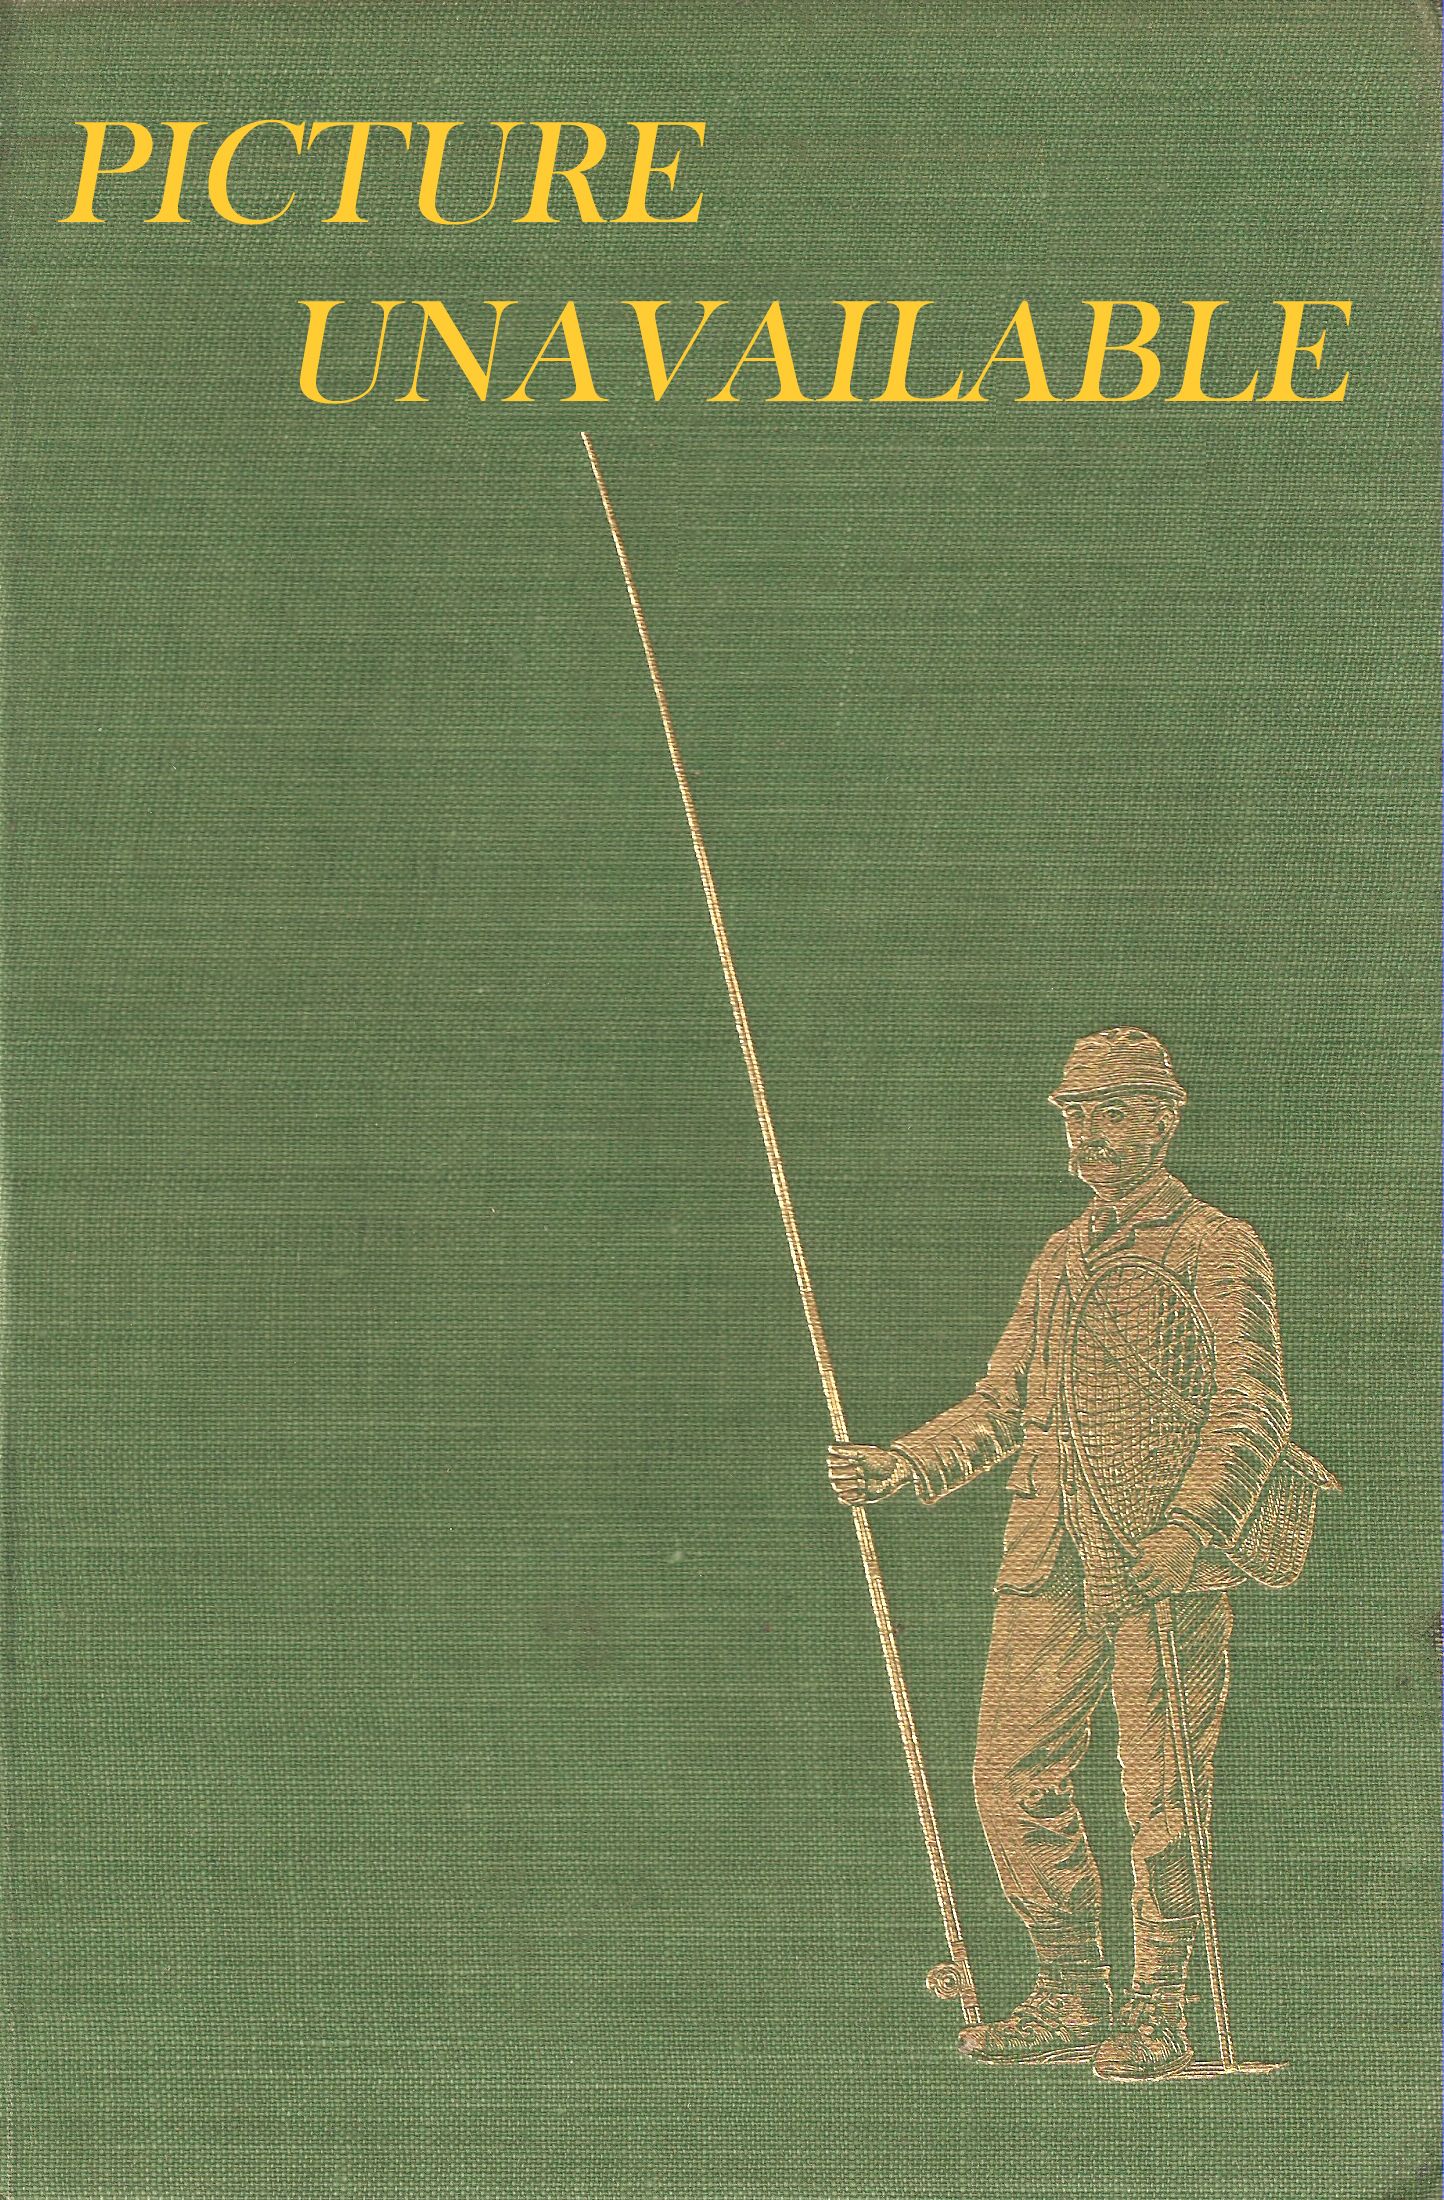 HANDCRAFTING BAMBOO FLY-RODS. By Wayne Cattanach. First edition.